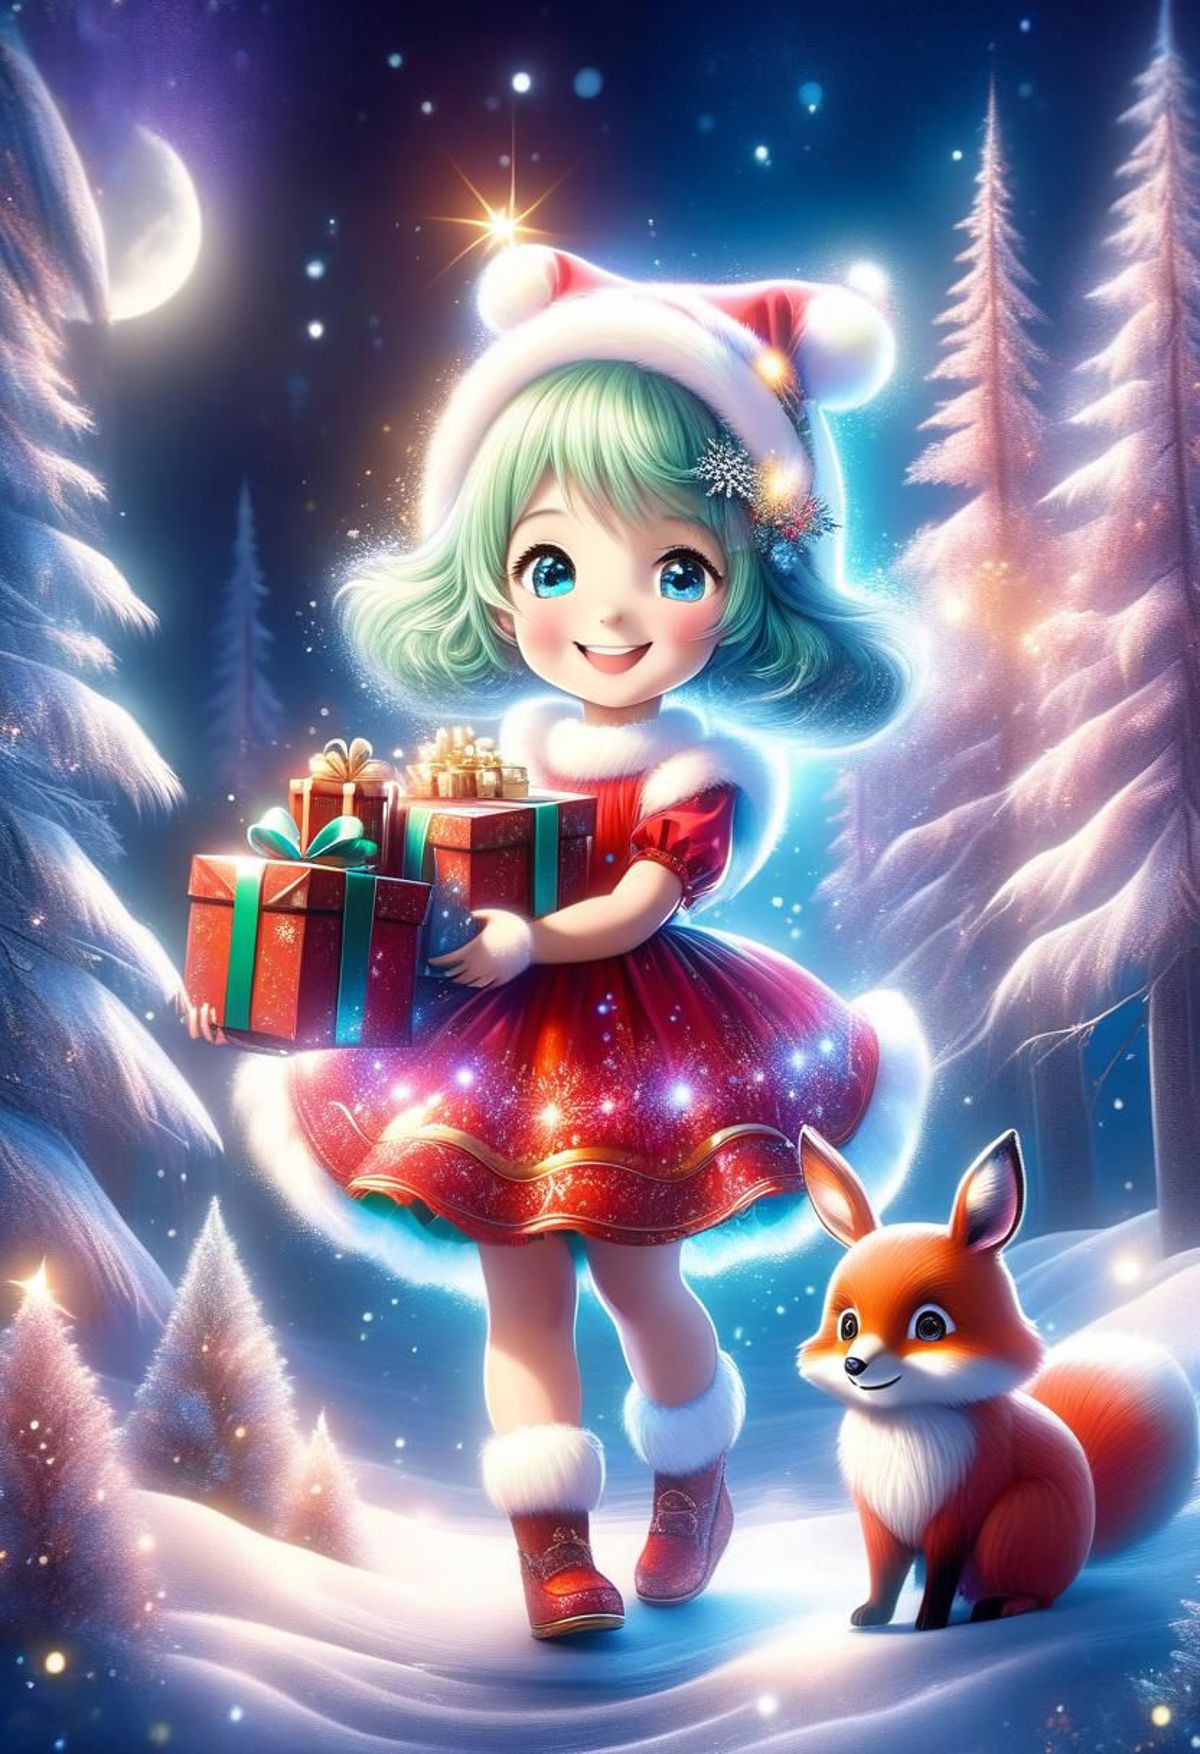 A green and red dressed girl with a fox and present.